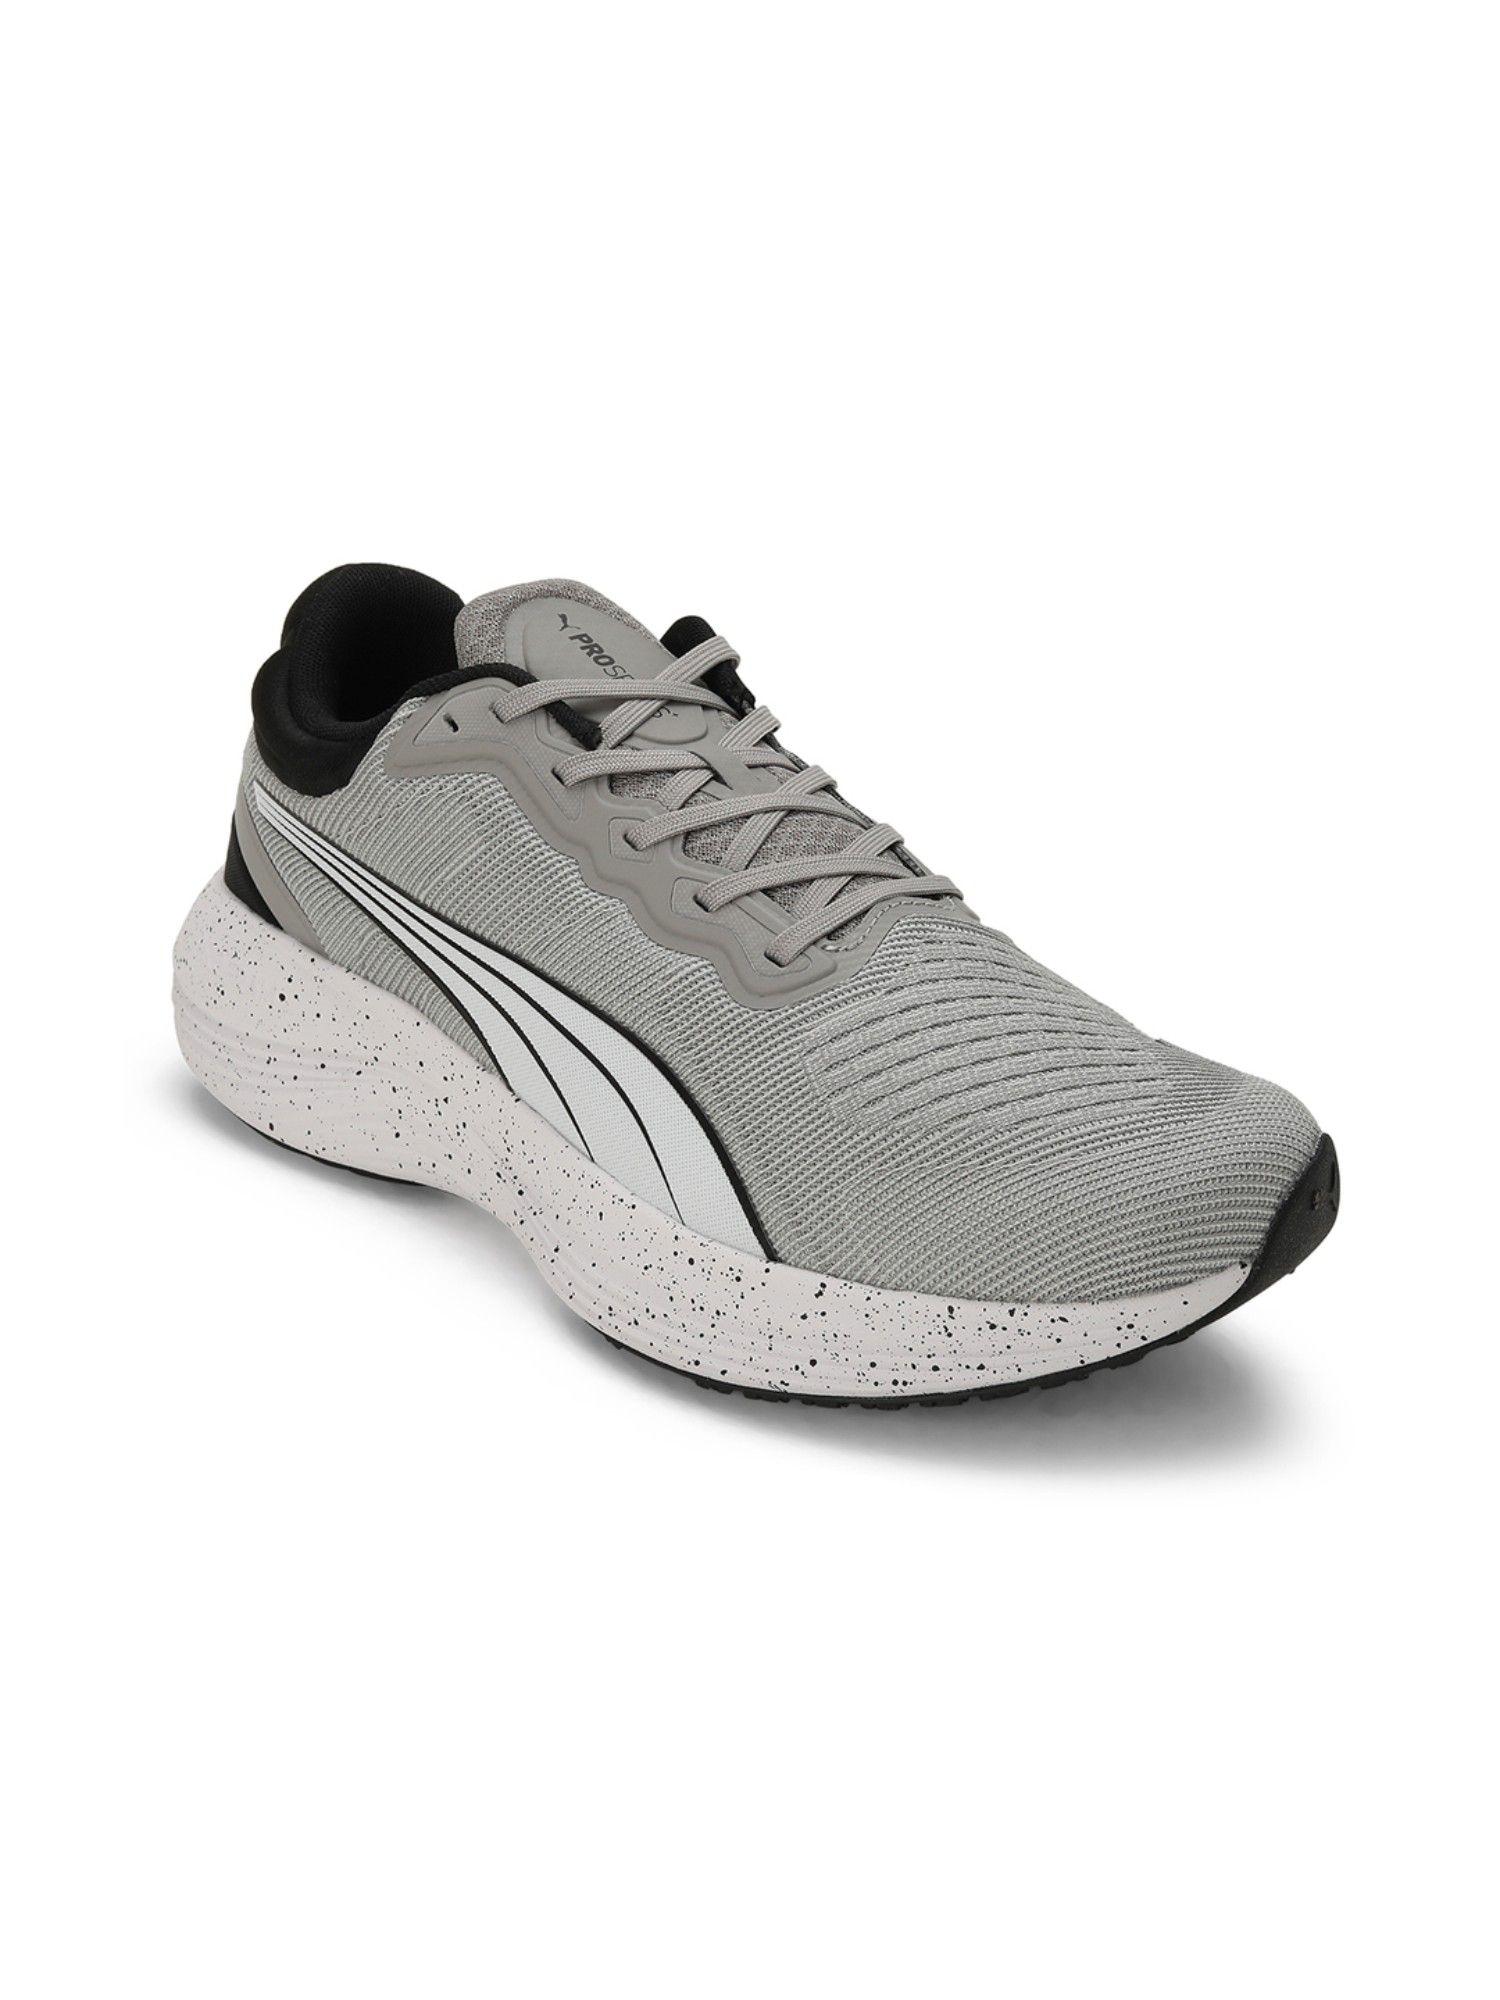 scend-pro-engineered-unisex-gray-running-shoes